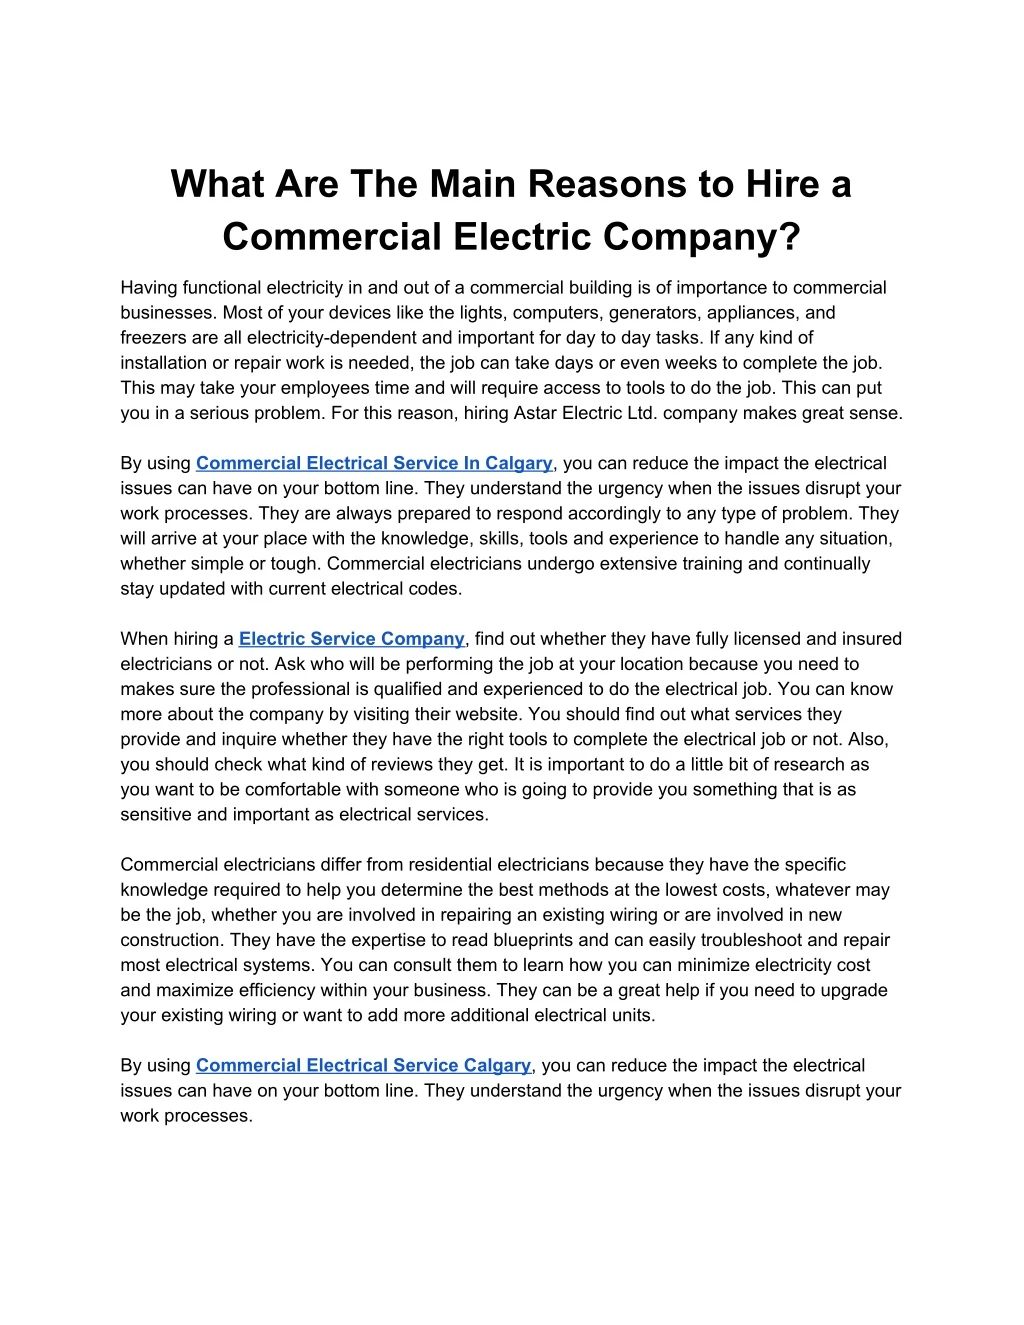 what are the main reasons to hire a commercial